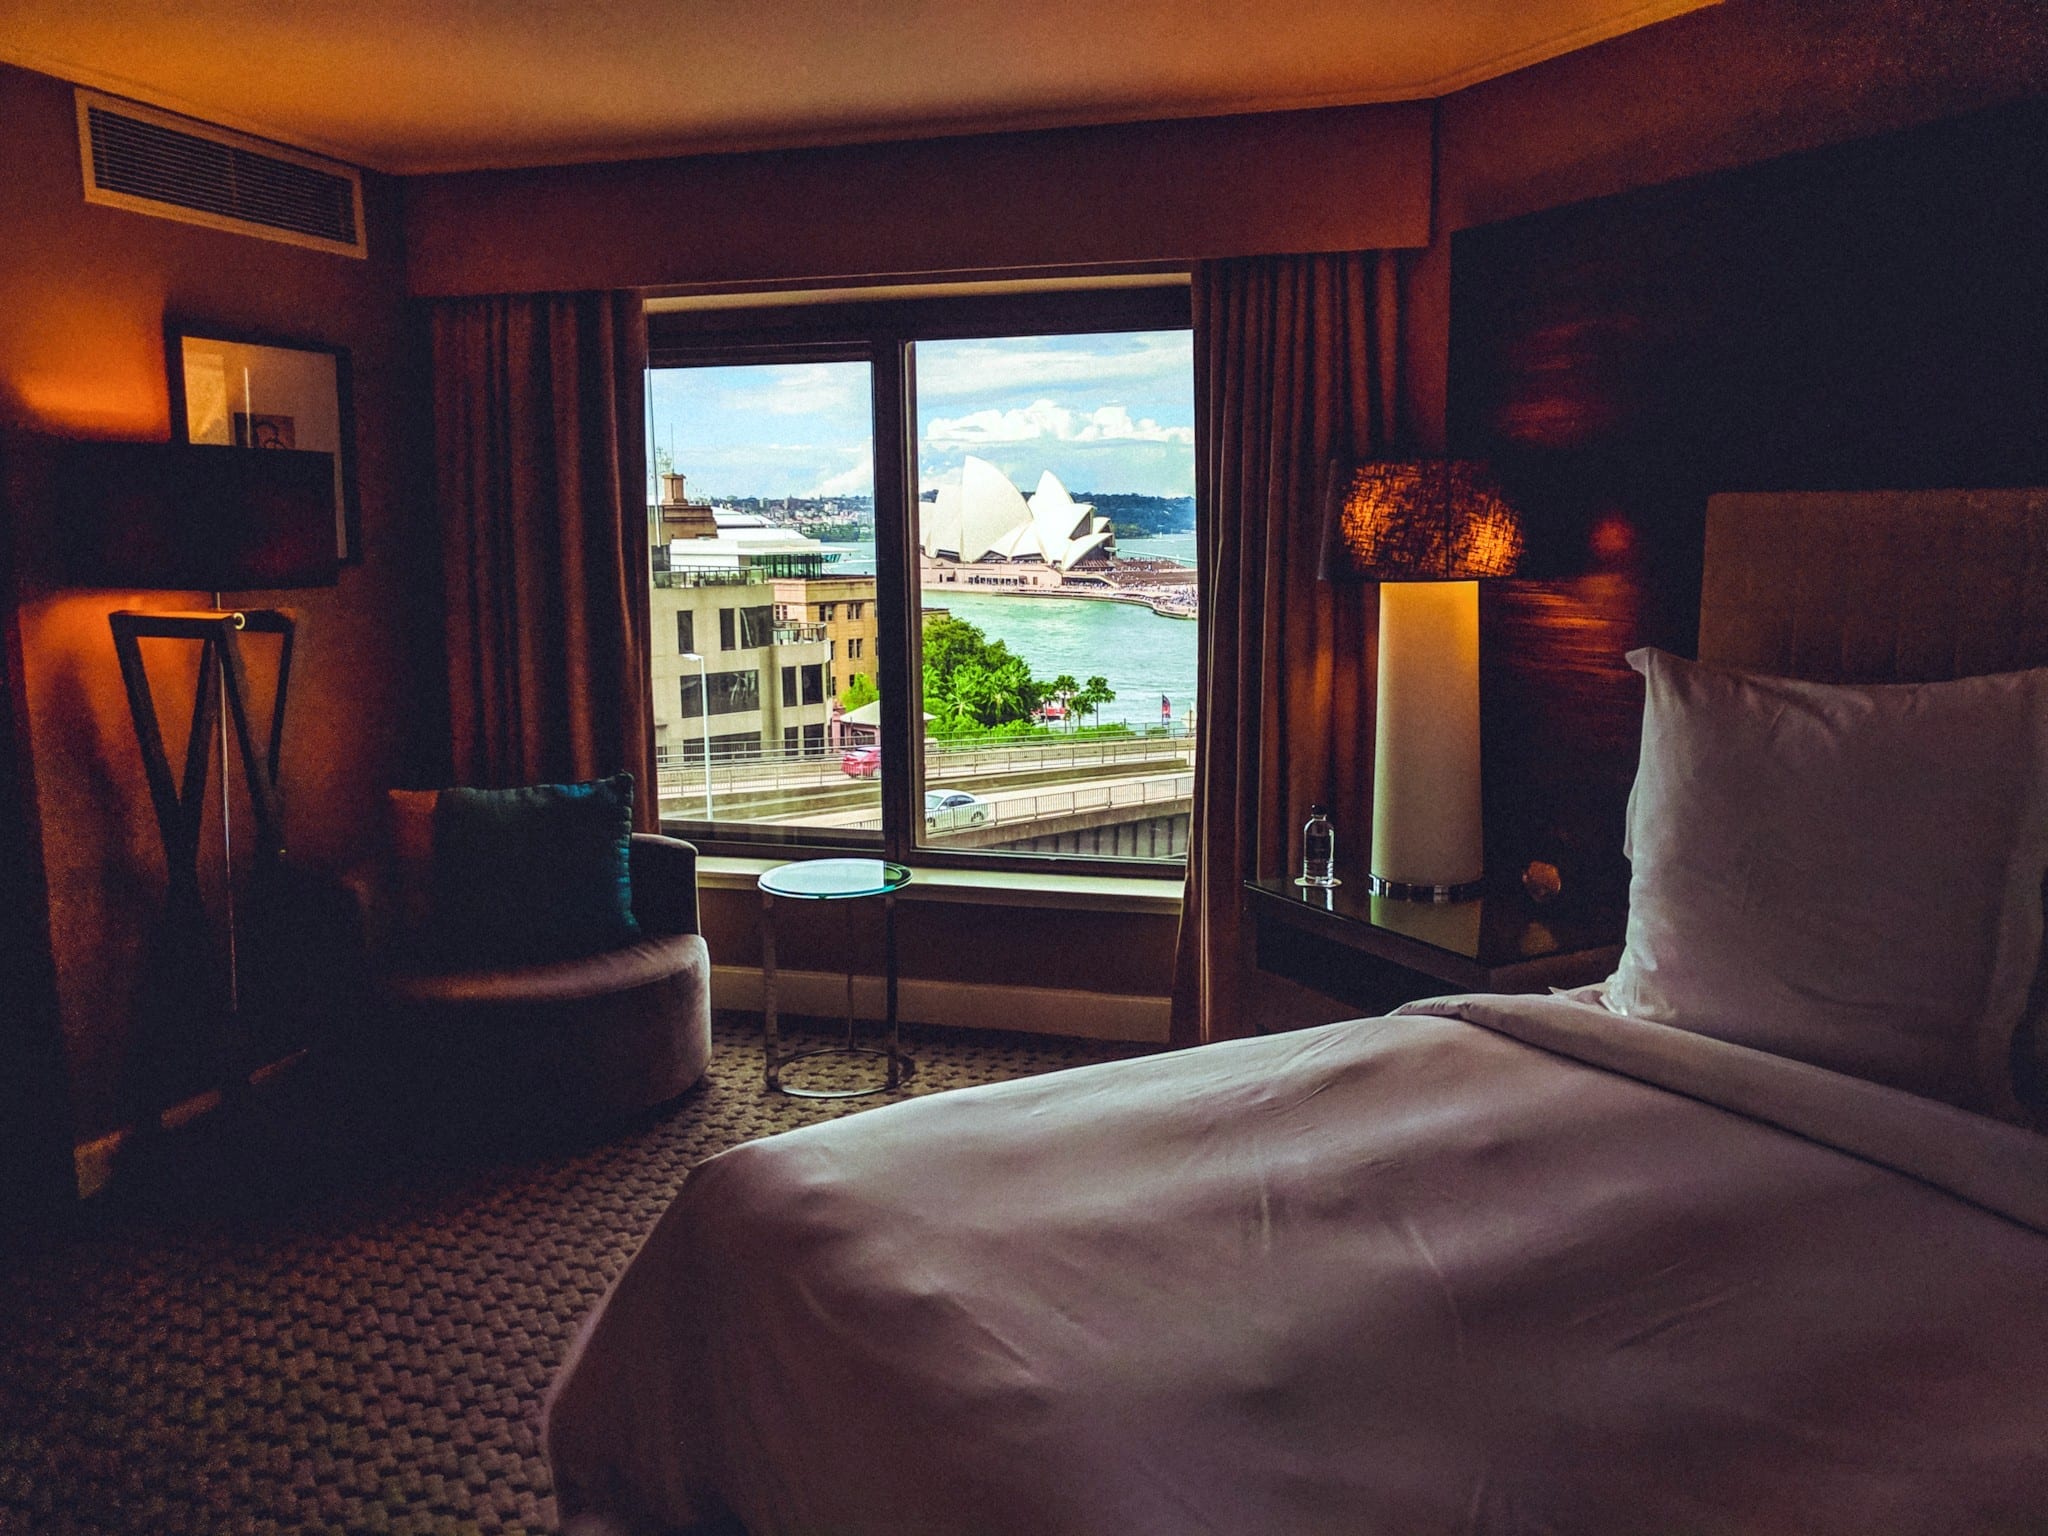 Review Two Stars At The Four Seasons Sydney Australia